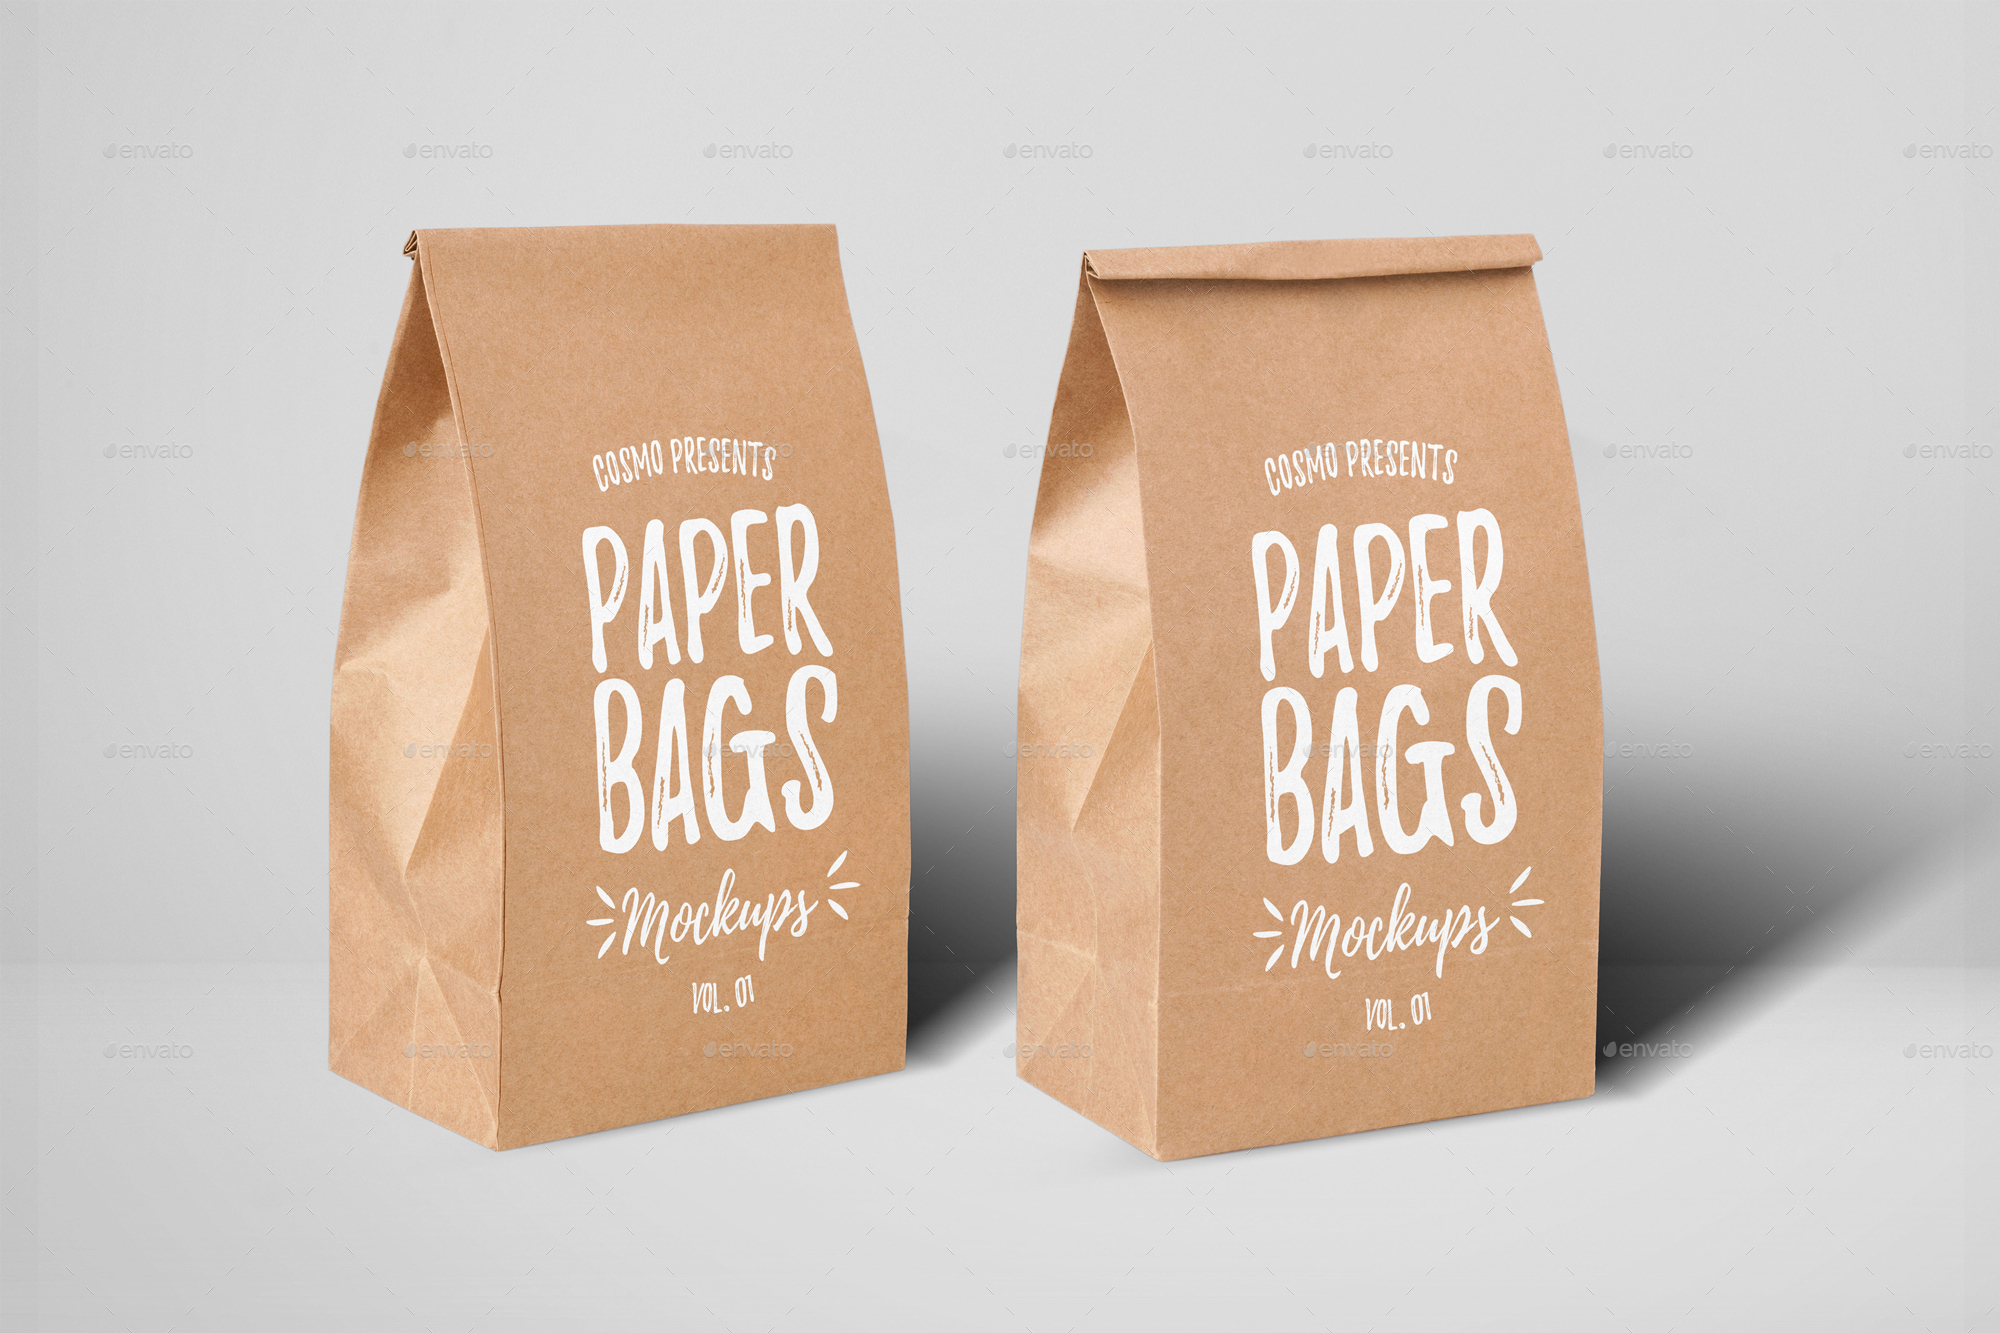 Download Paper Bags Mockups by MahmoudWally | GraphicRiver